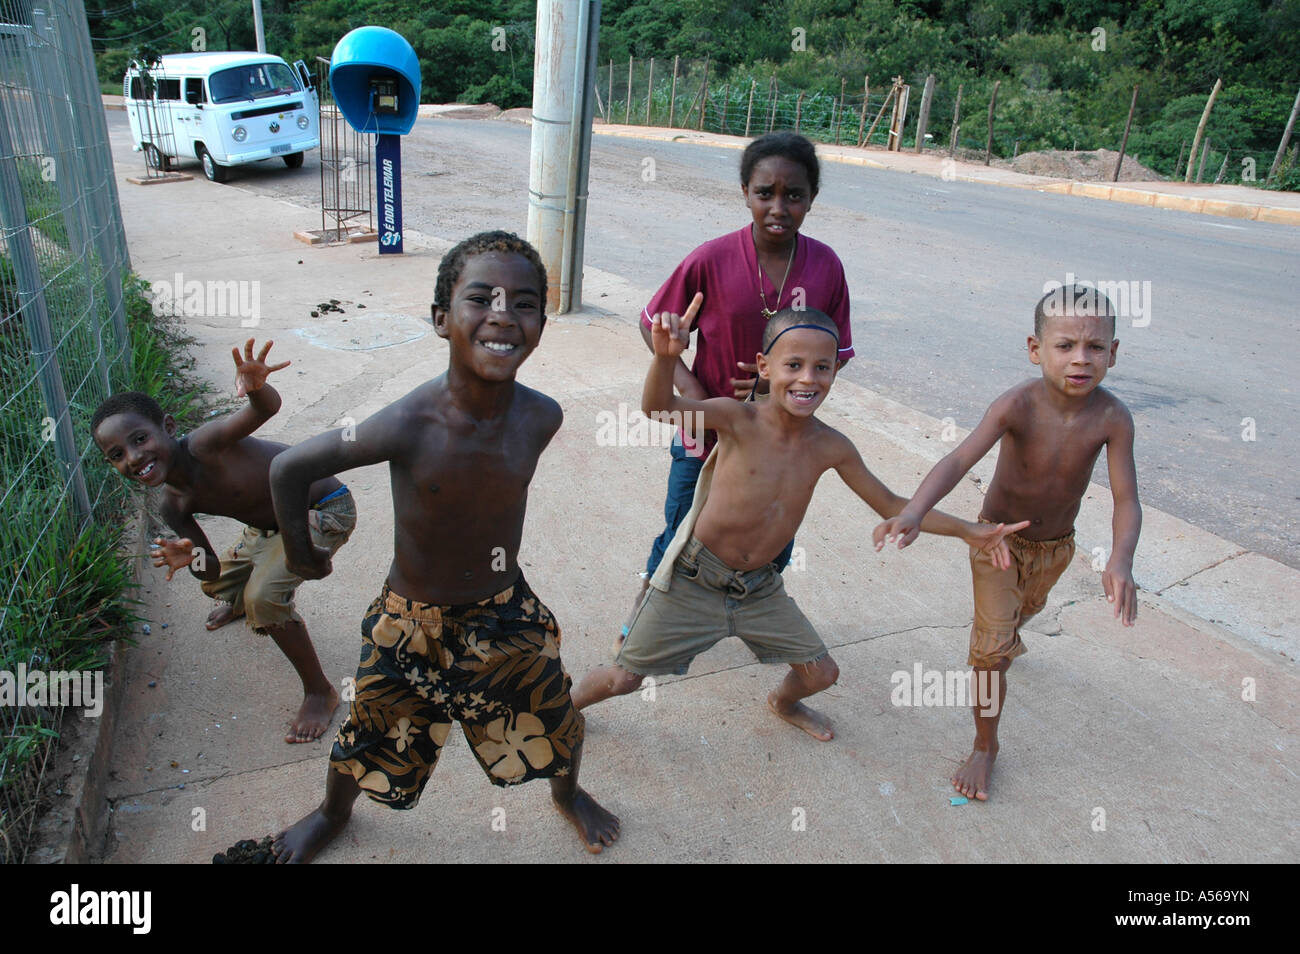 Painet iy8135 brazil children kids boys belo horizonte 2005 country  developing nation less economically developed culture Stock Photo - Alamy